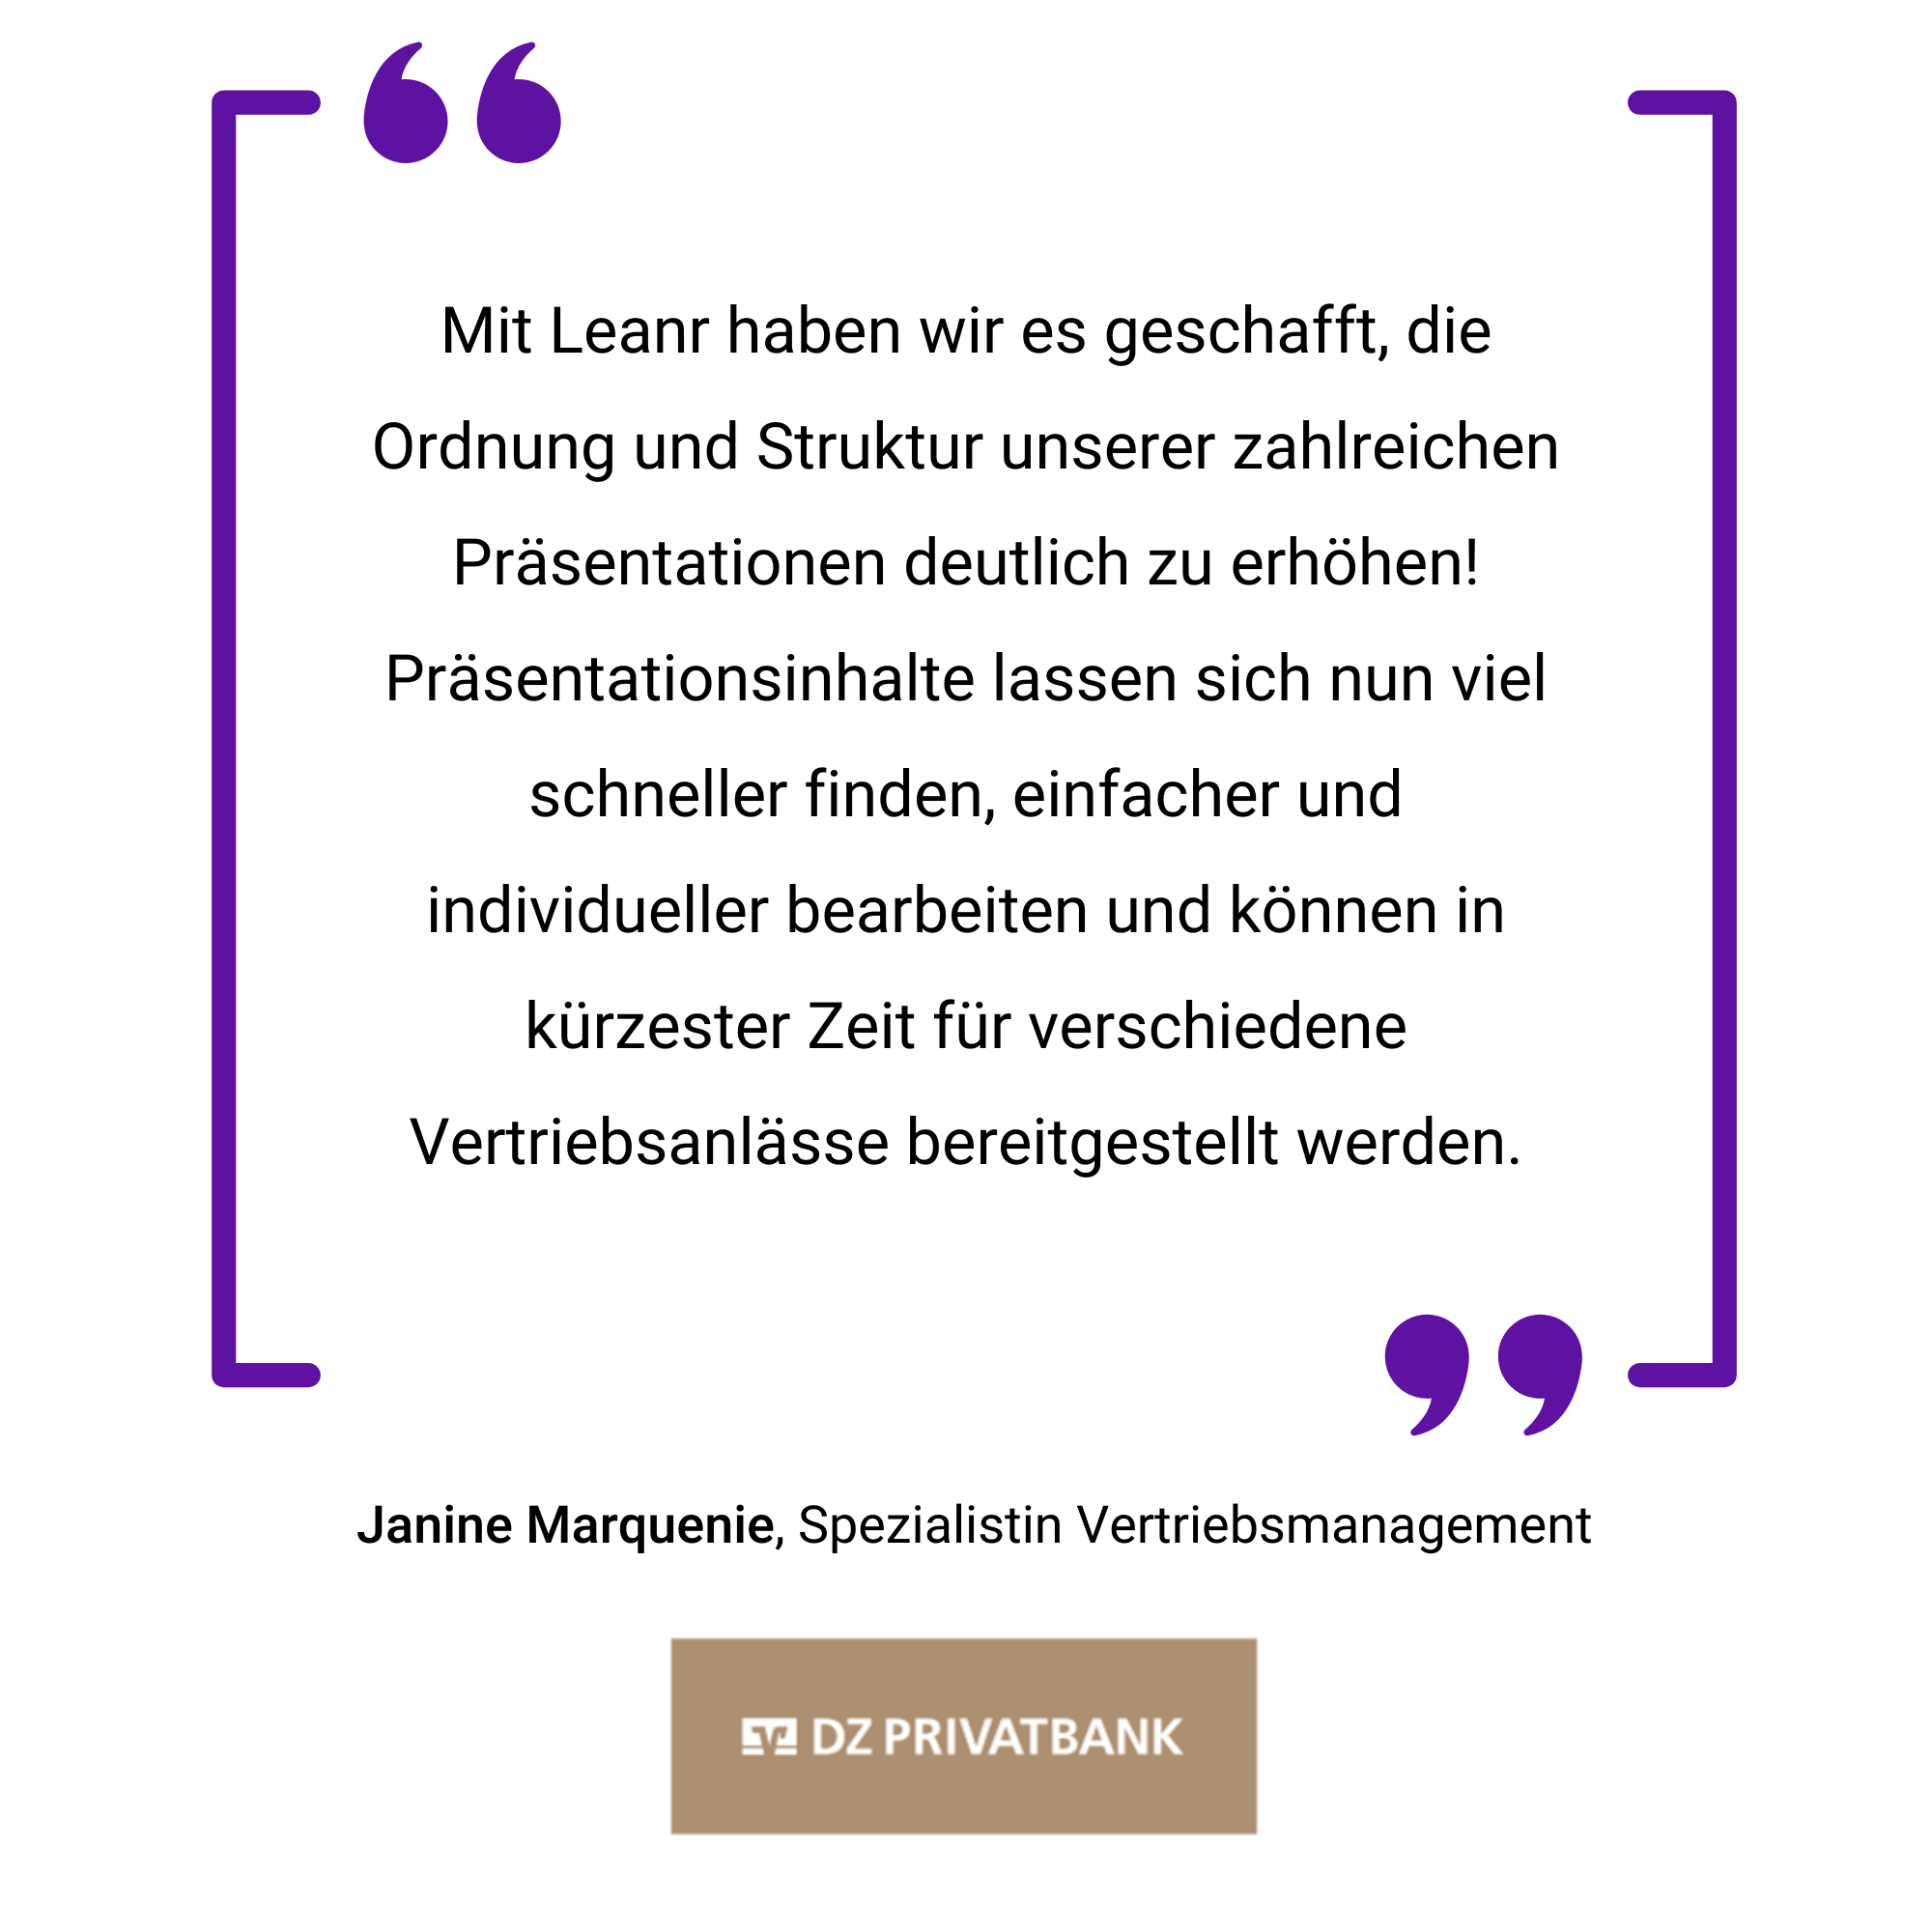 A purple square featuring a quote in german by janine marquesenio about increasing presentations and efficiency at dz privatbank, presented in white text.